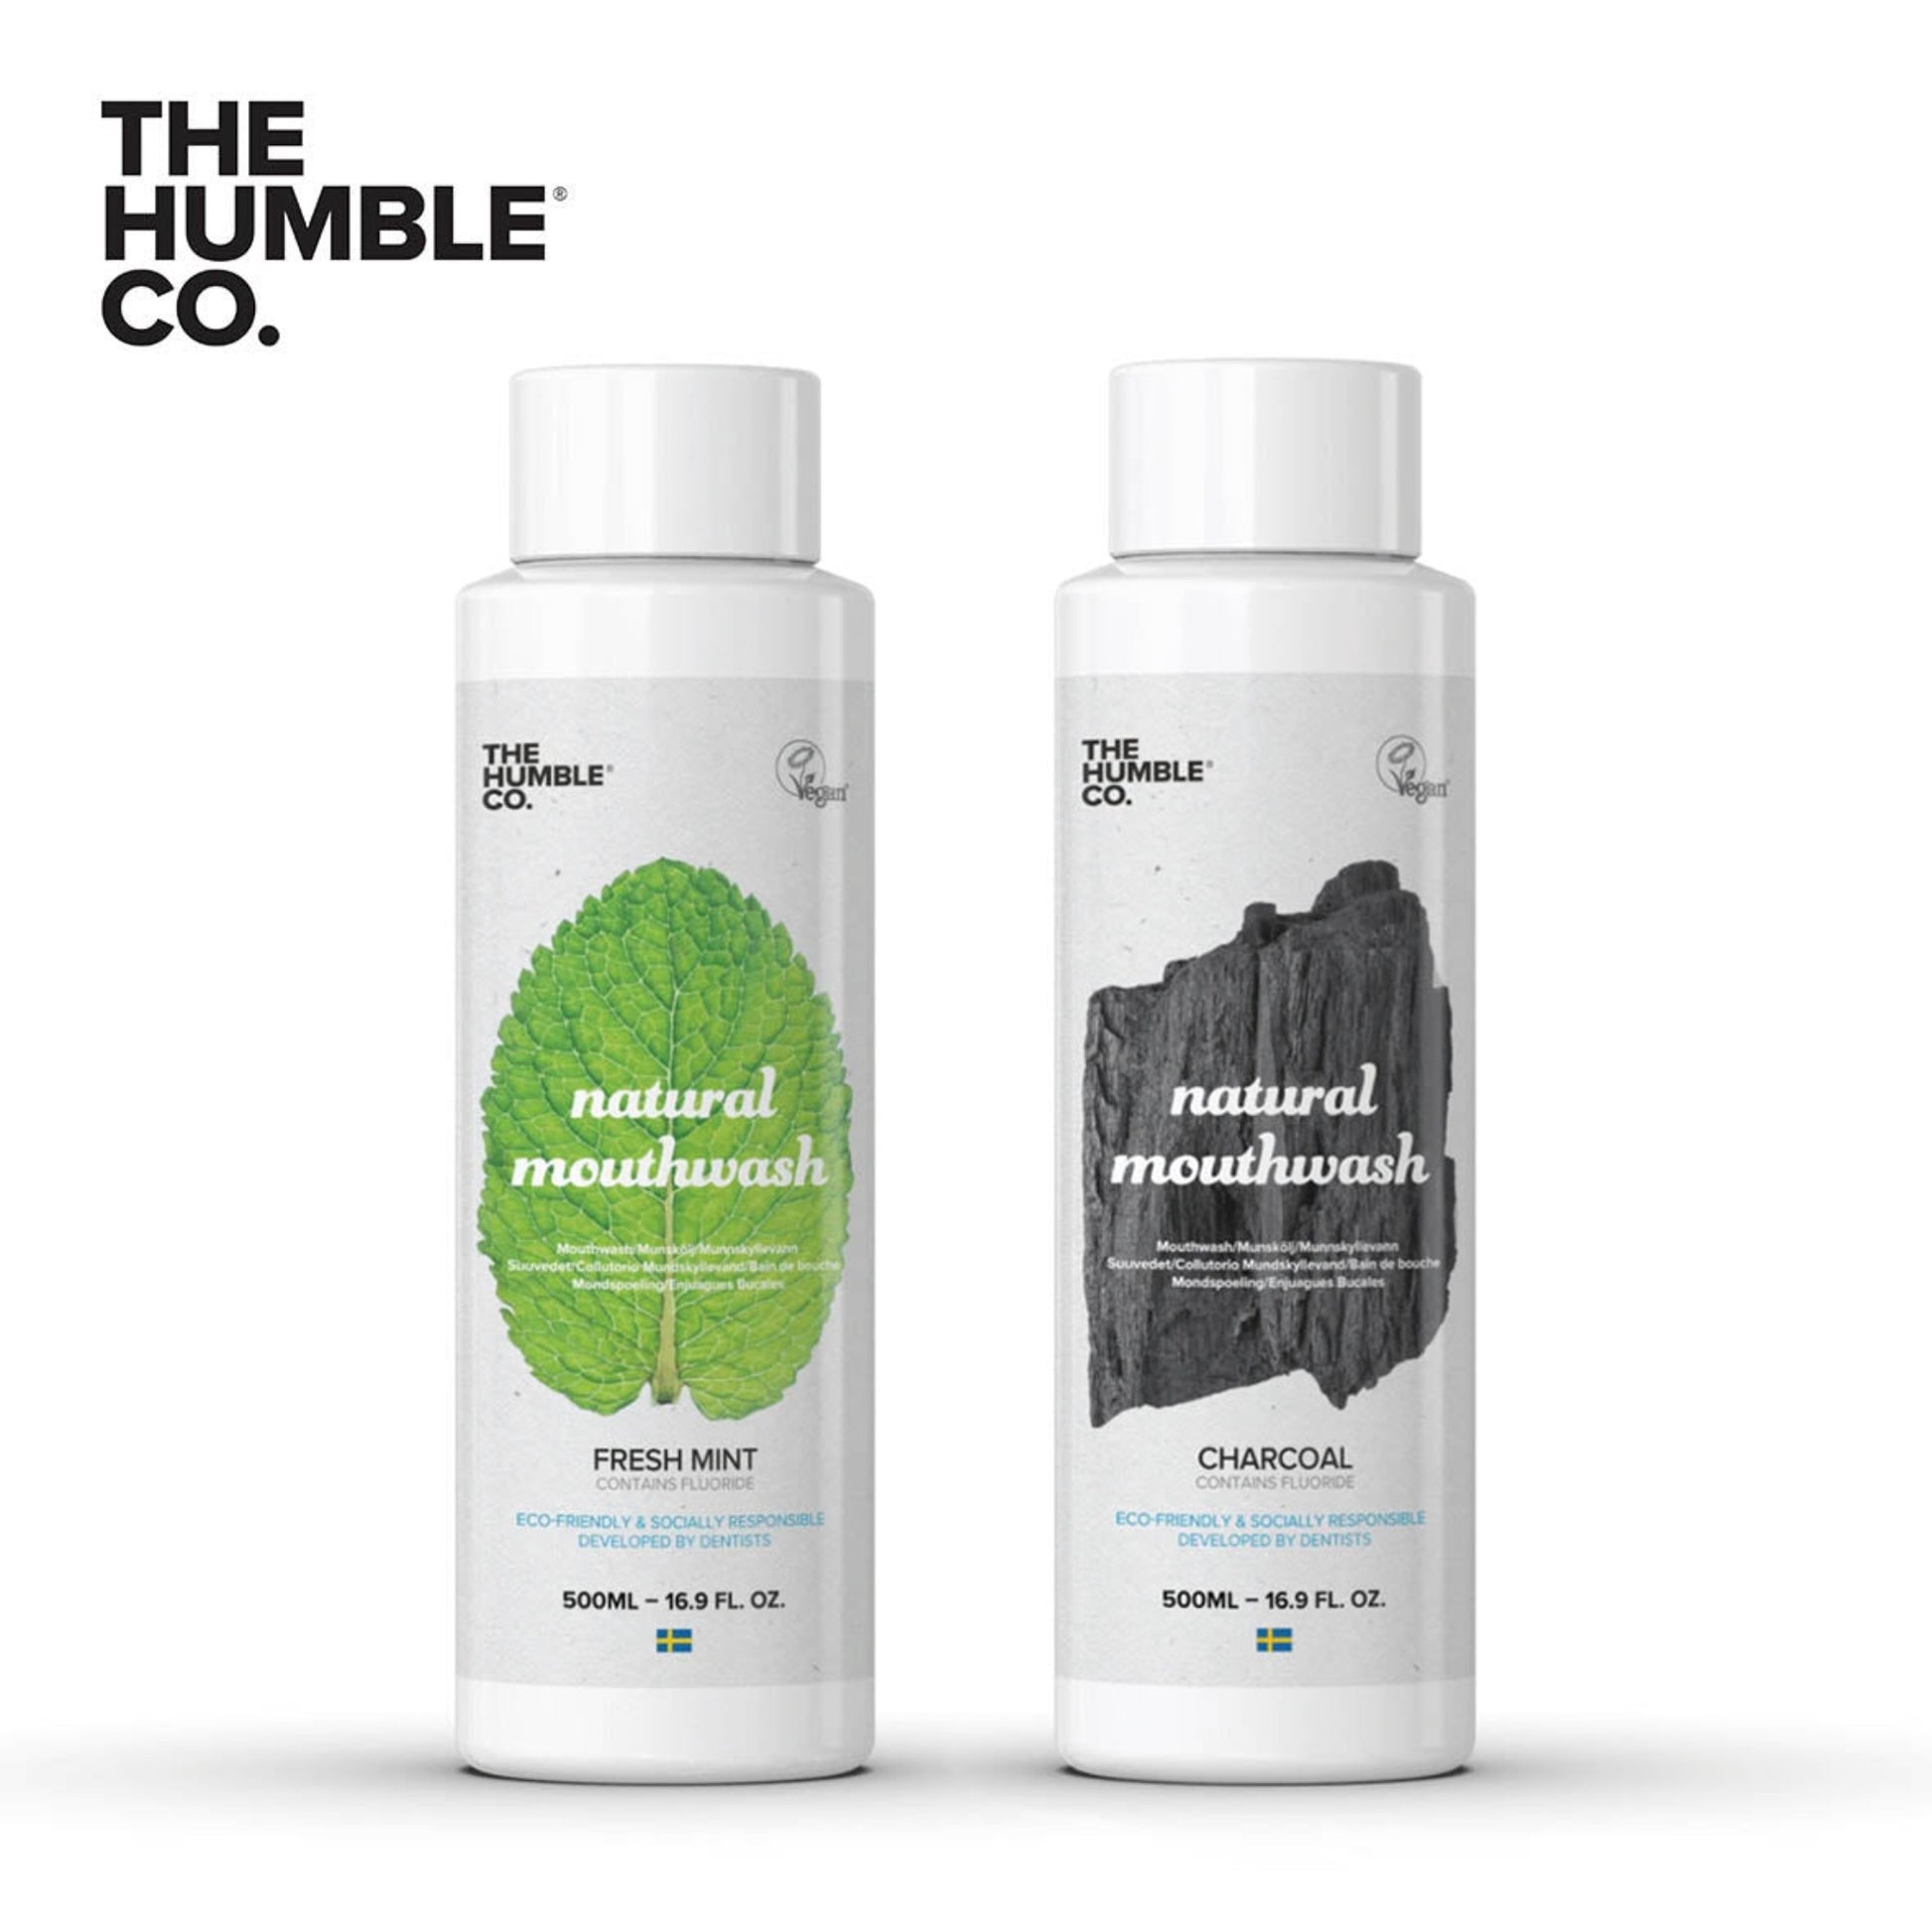 THE HUMBLE CO. Mouthwash 500ml with Flouride (4620414419009)